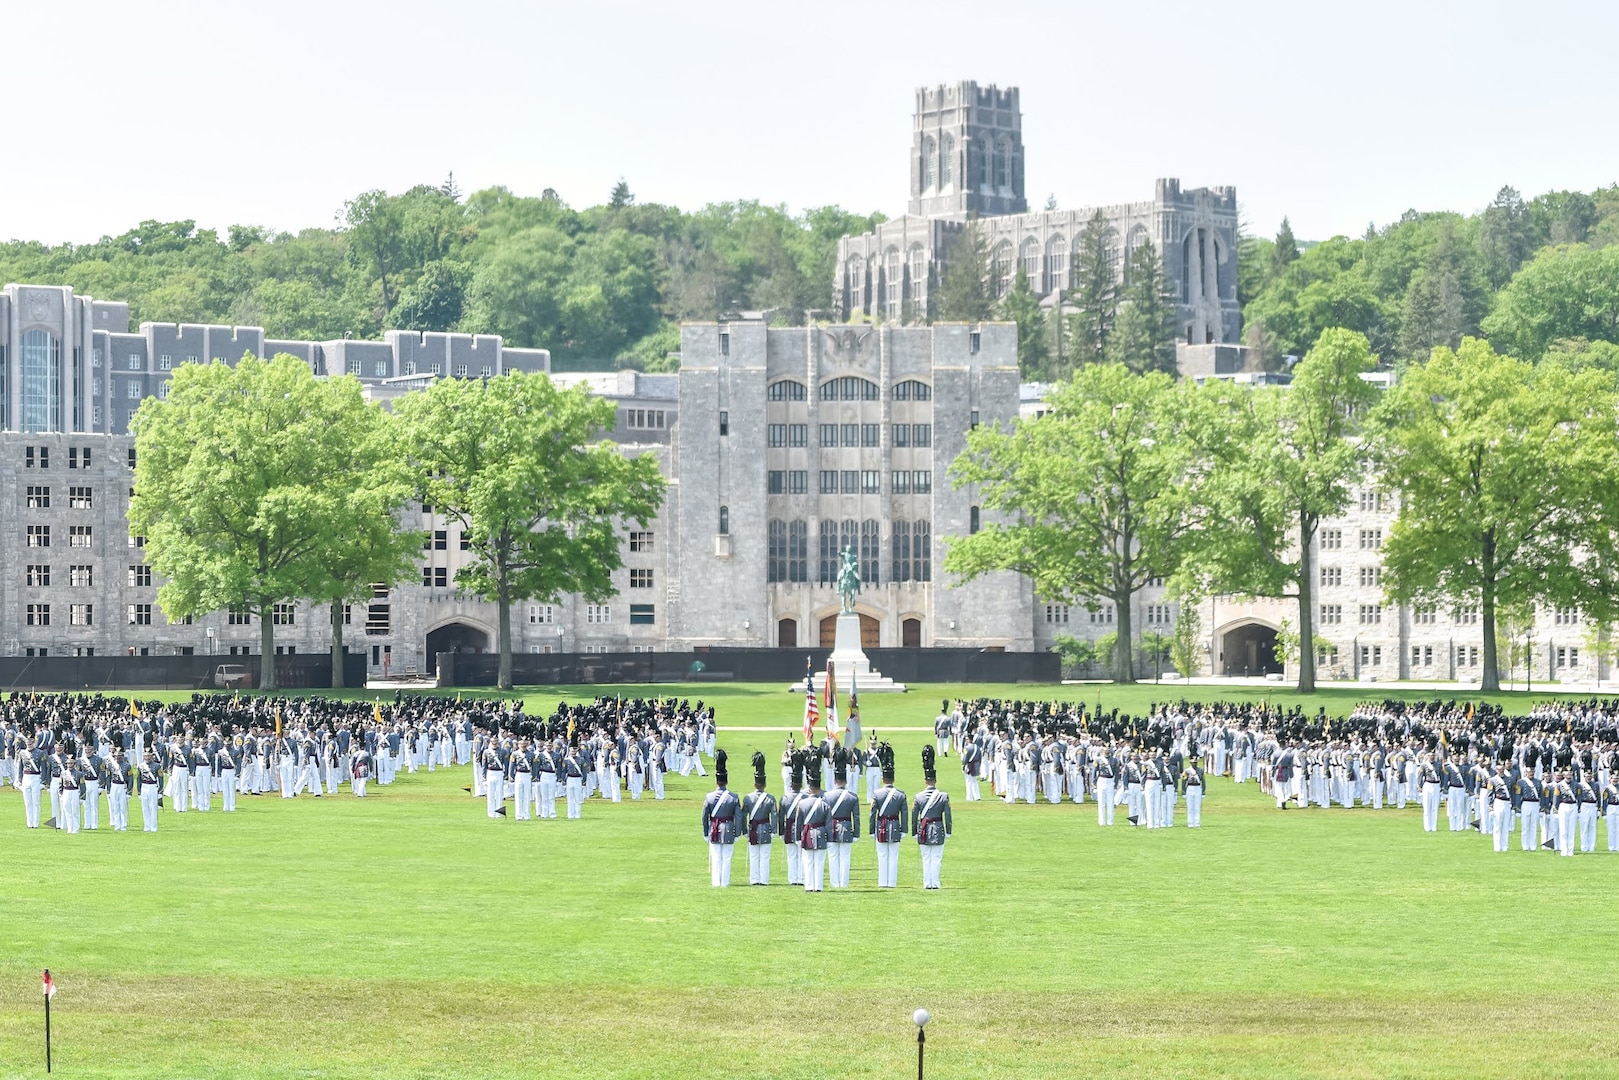 The 2018 graduation parade takes place at the U.S. Military Academy at West Point, N.Y.